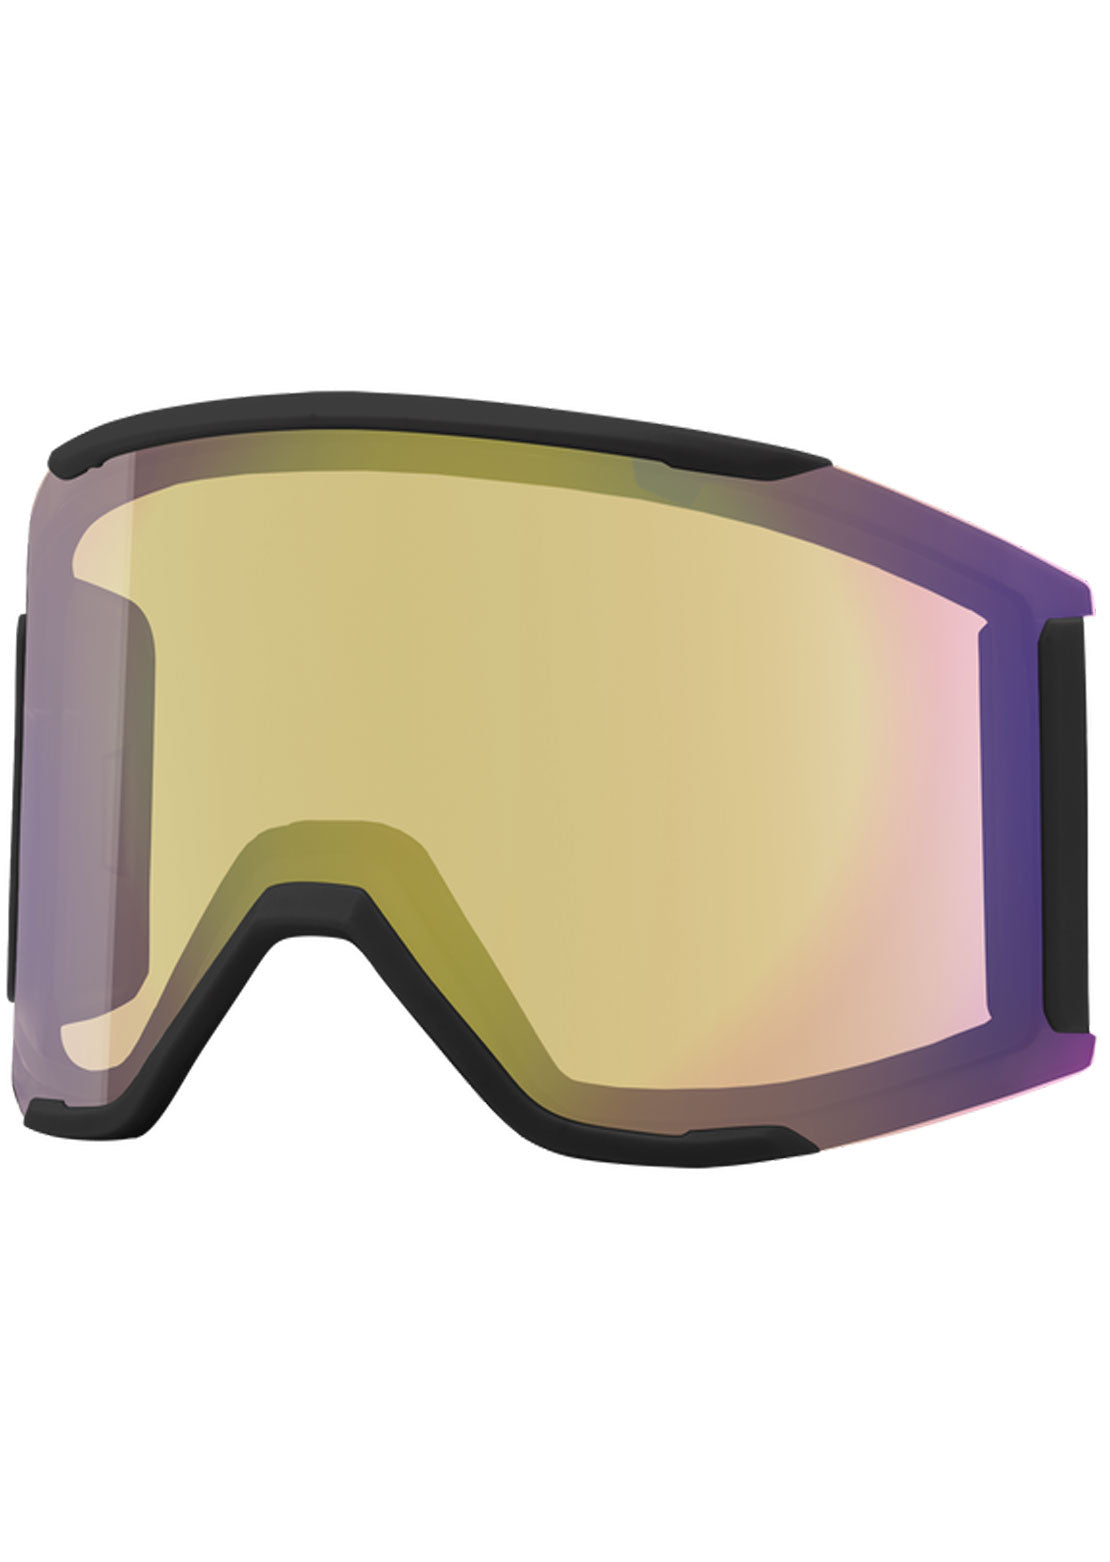 Smith Squad Mag Goggles Slate/ChromaPop Everyday Red Mirror